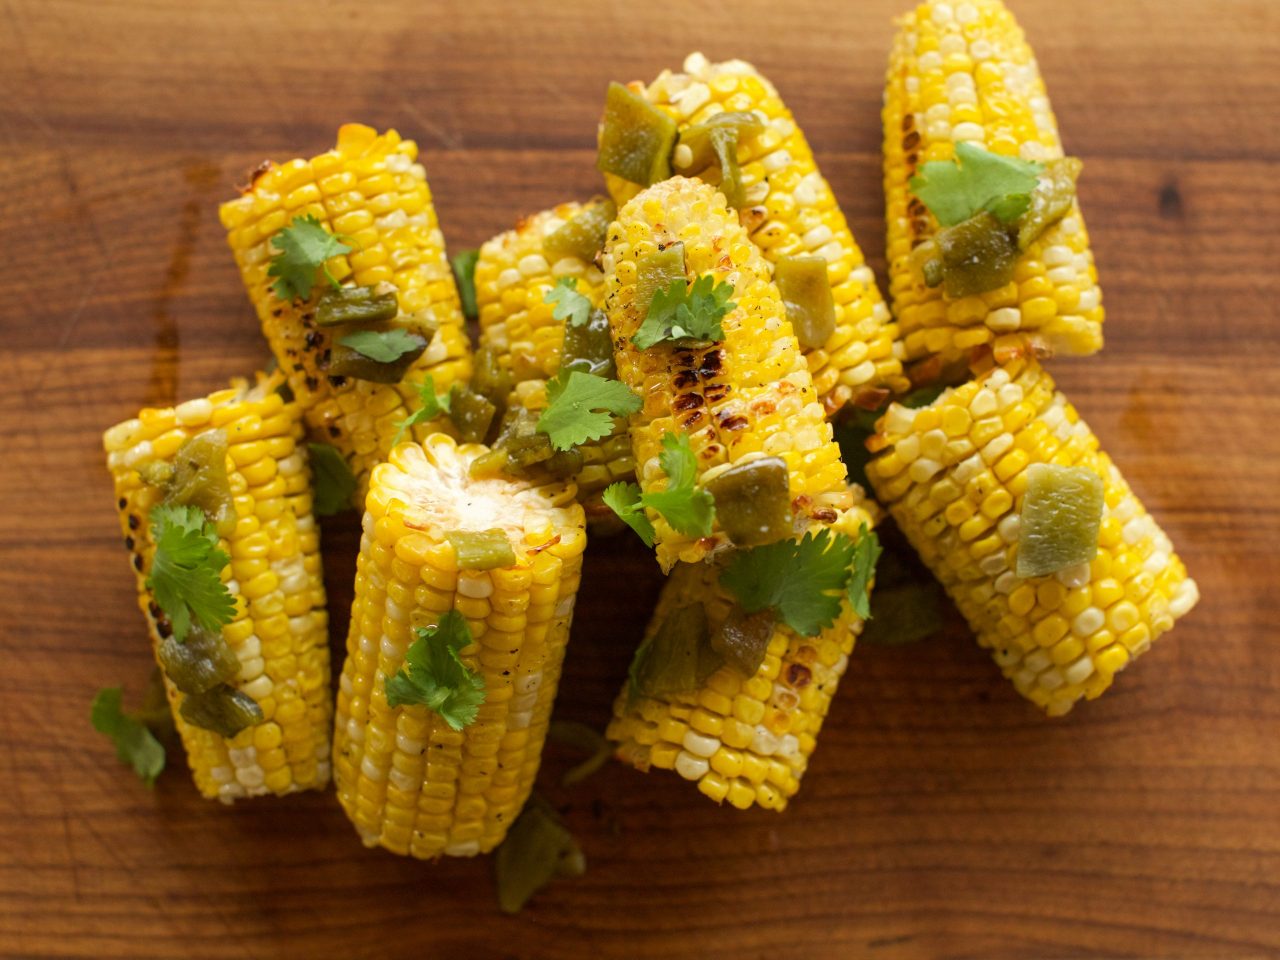 Ree Drummond's Roasted Corn with Chili Butter, as seen on The Pioneer Woman, Season 19.